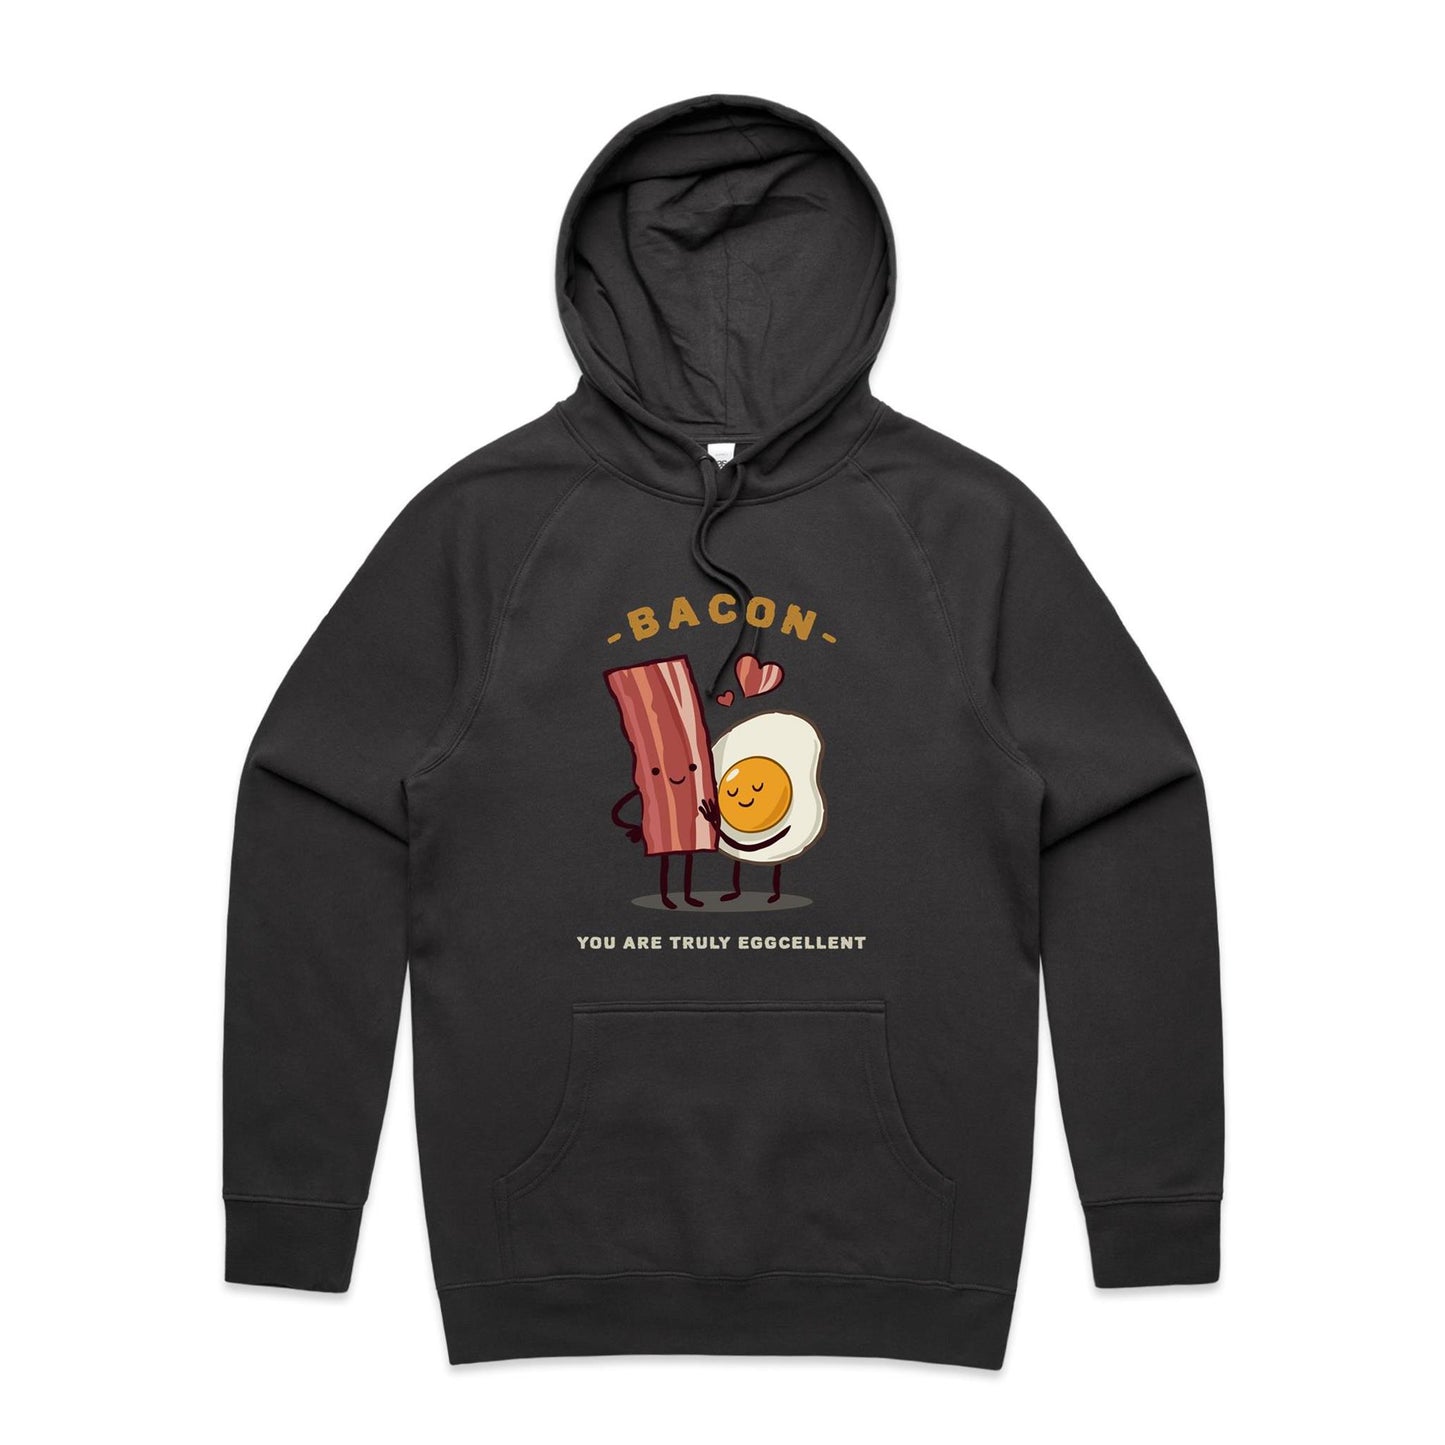 Bacon, You Are Truly Eggcellent - Supply Hood Coal Mens Supply Hoodie Food